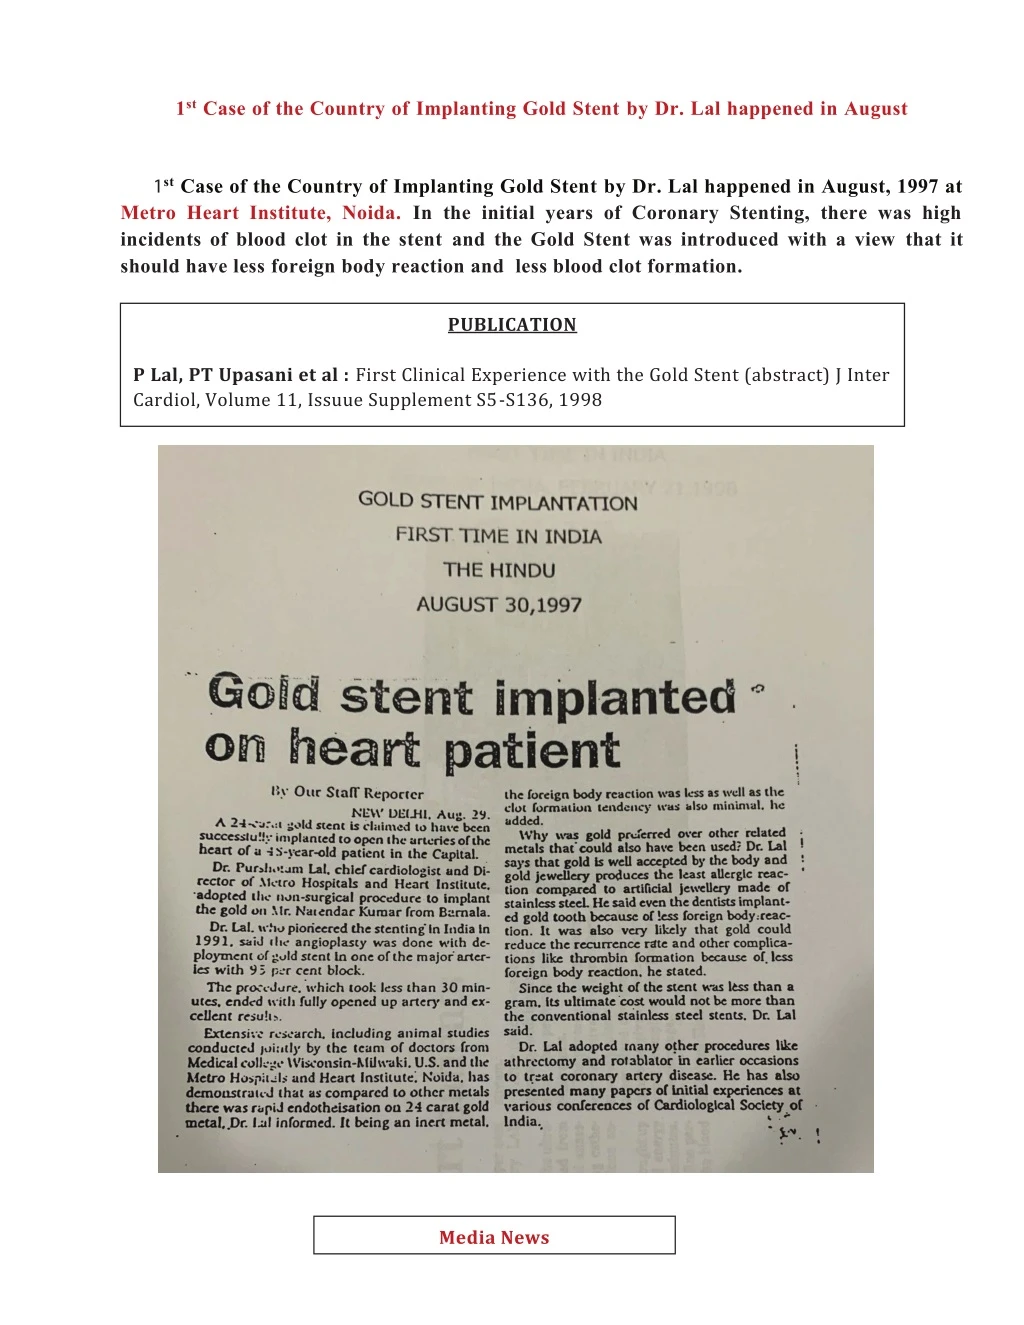 1 st case of the country of implanting gold stent